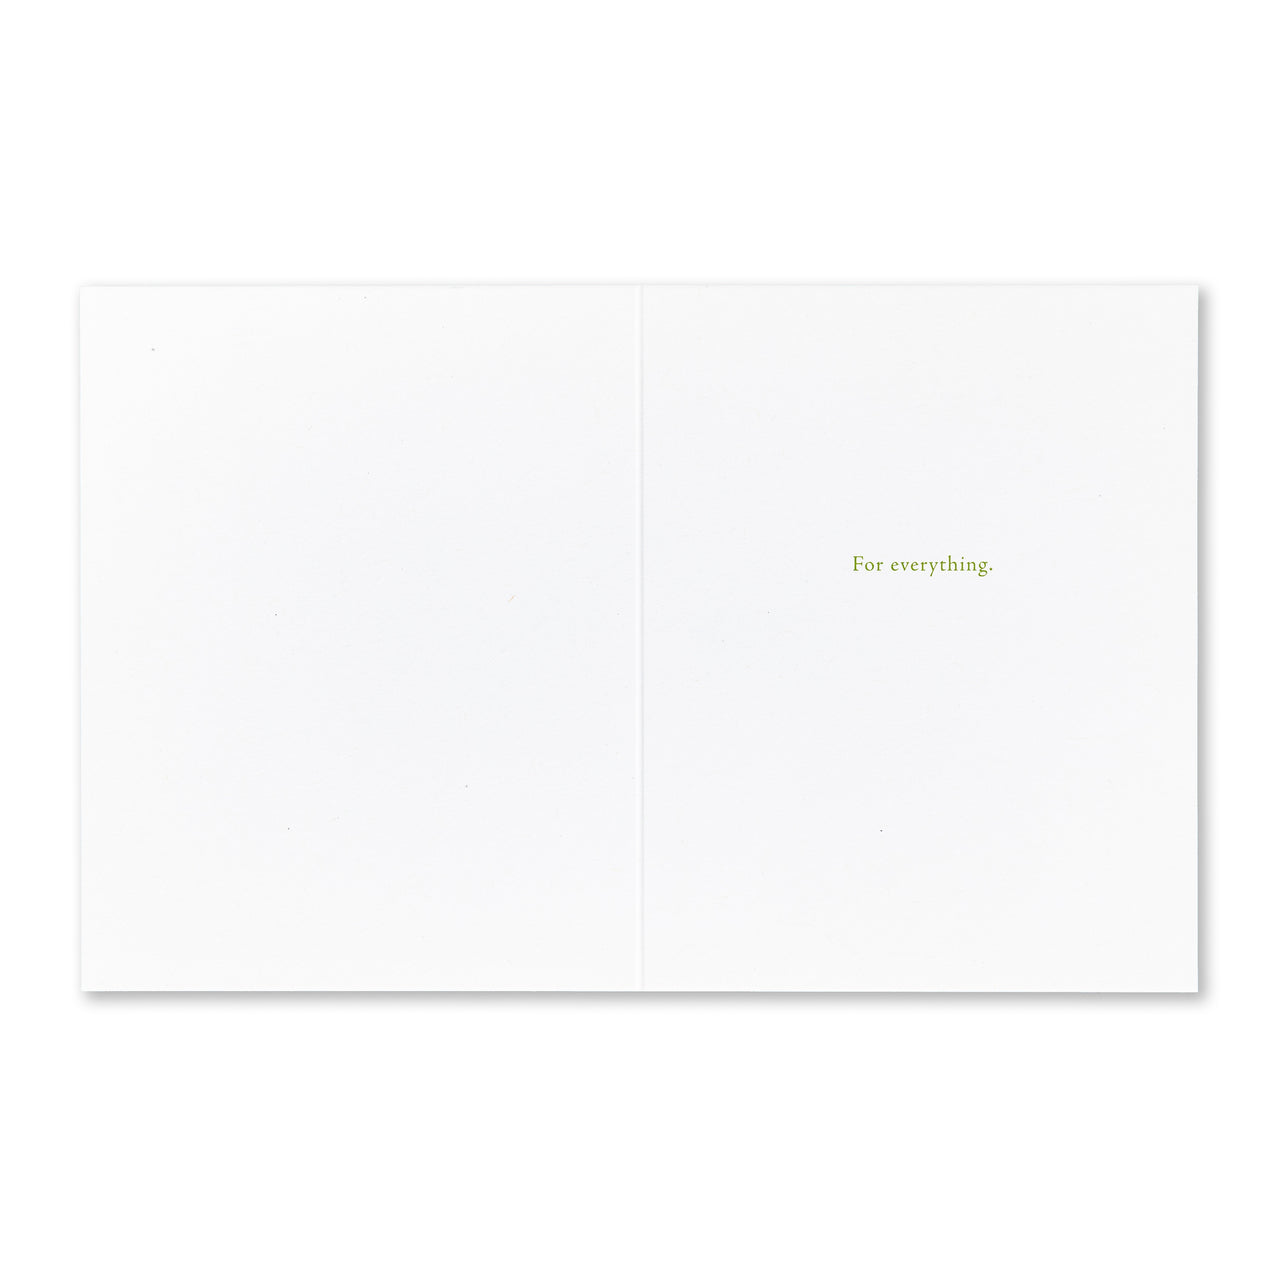 Positively Green Greeting Card - Thank You -  "I Thank You From the Depths of My Heart" - Alexandre Dumas - Mellow Monkey